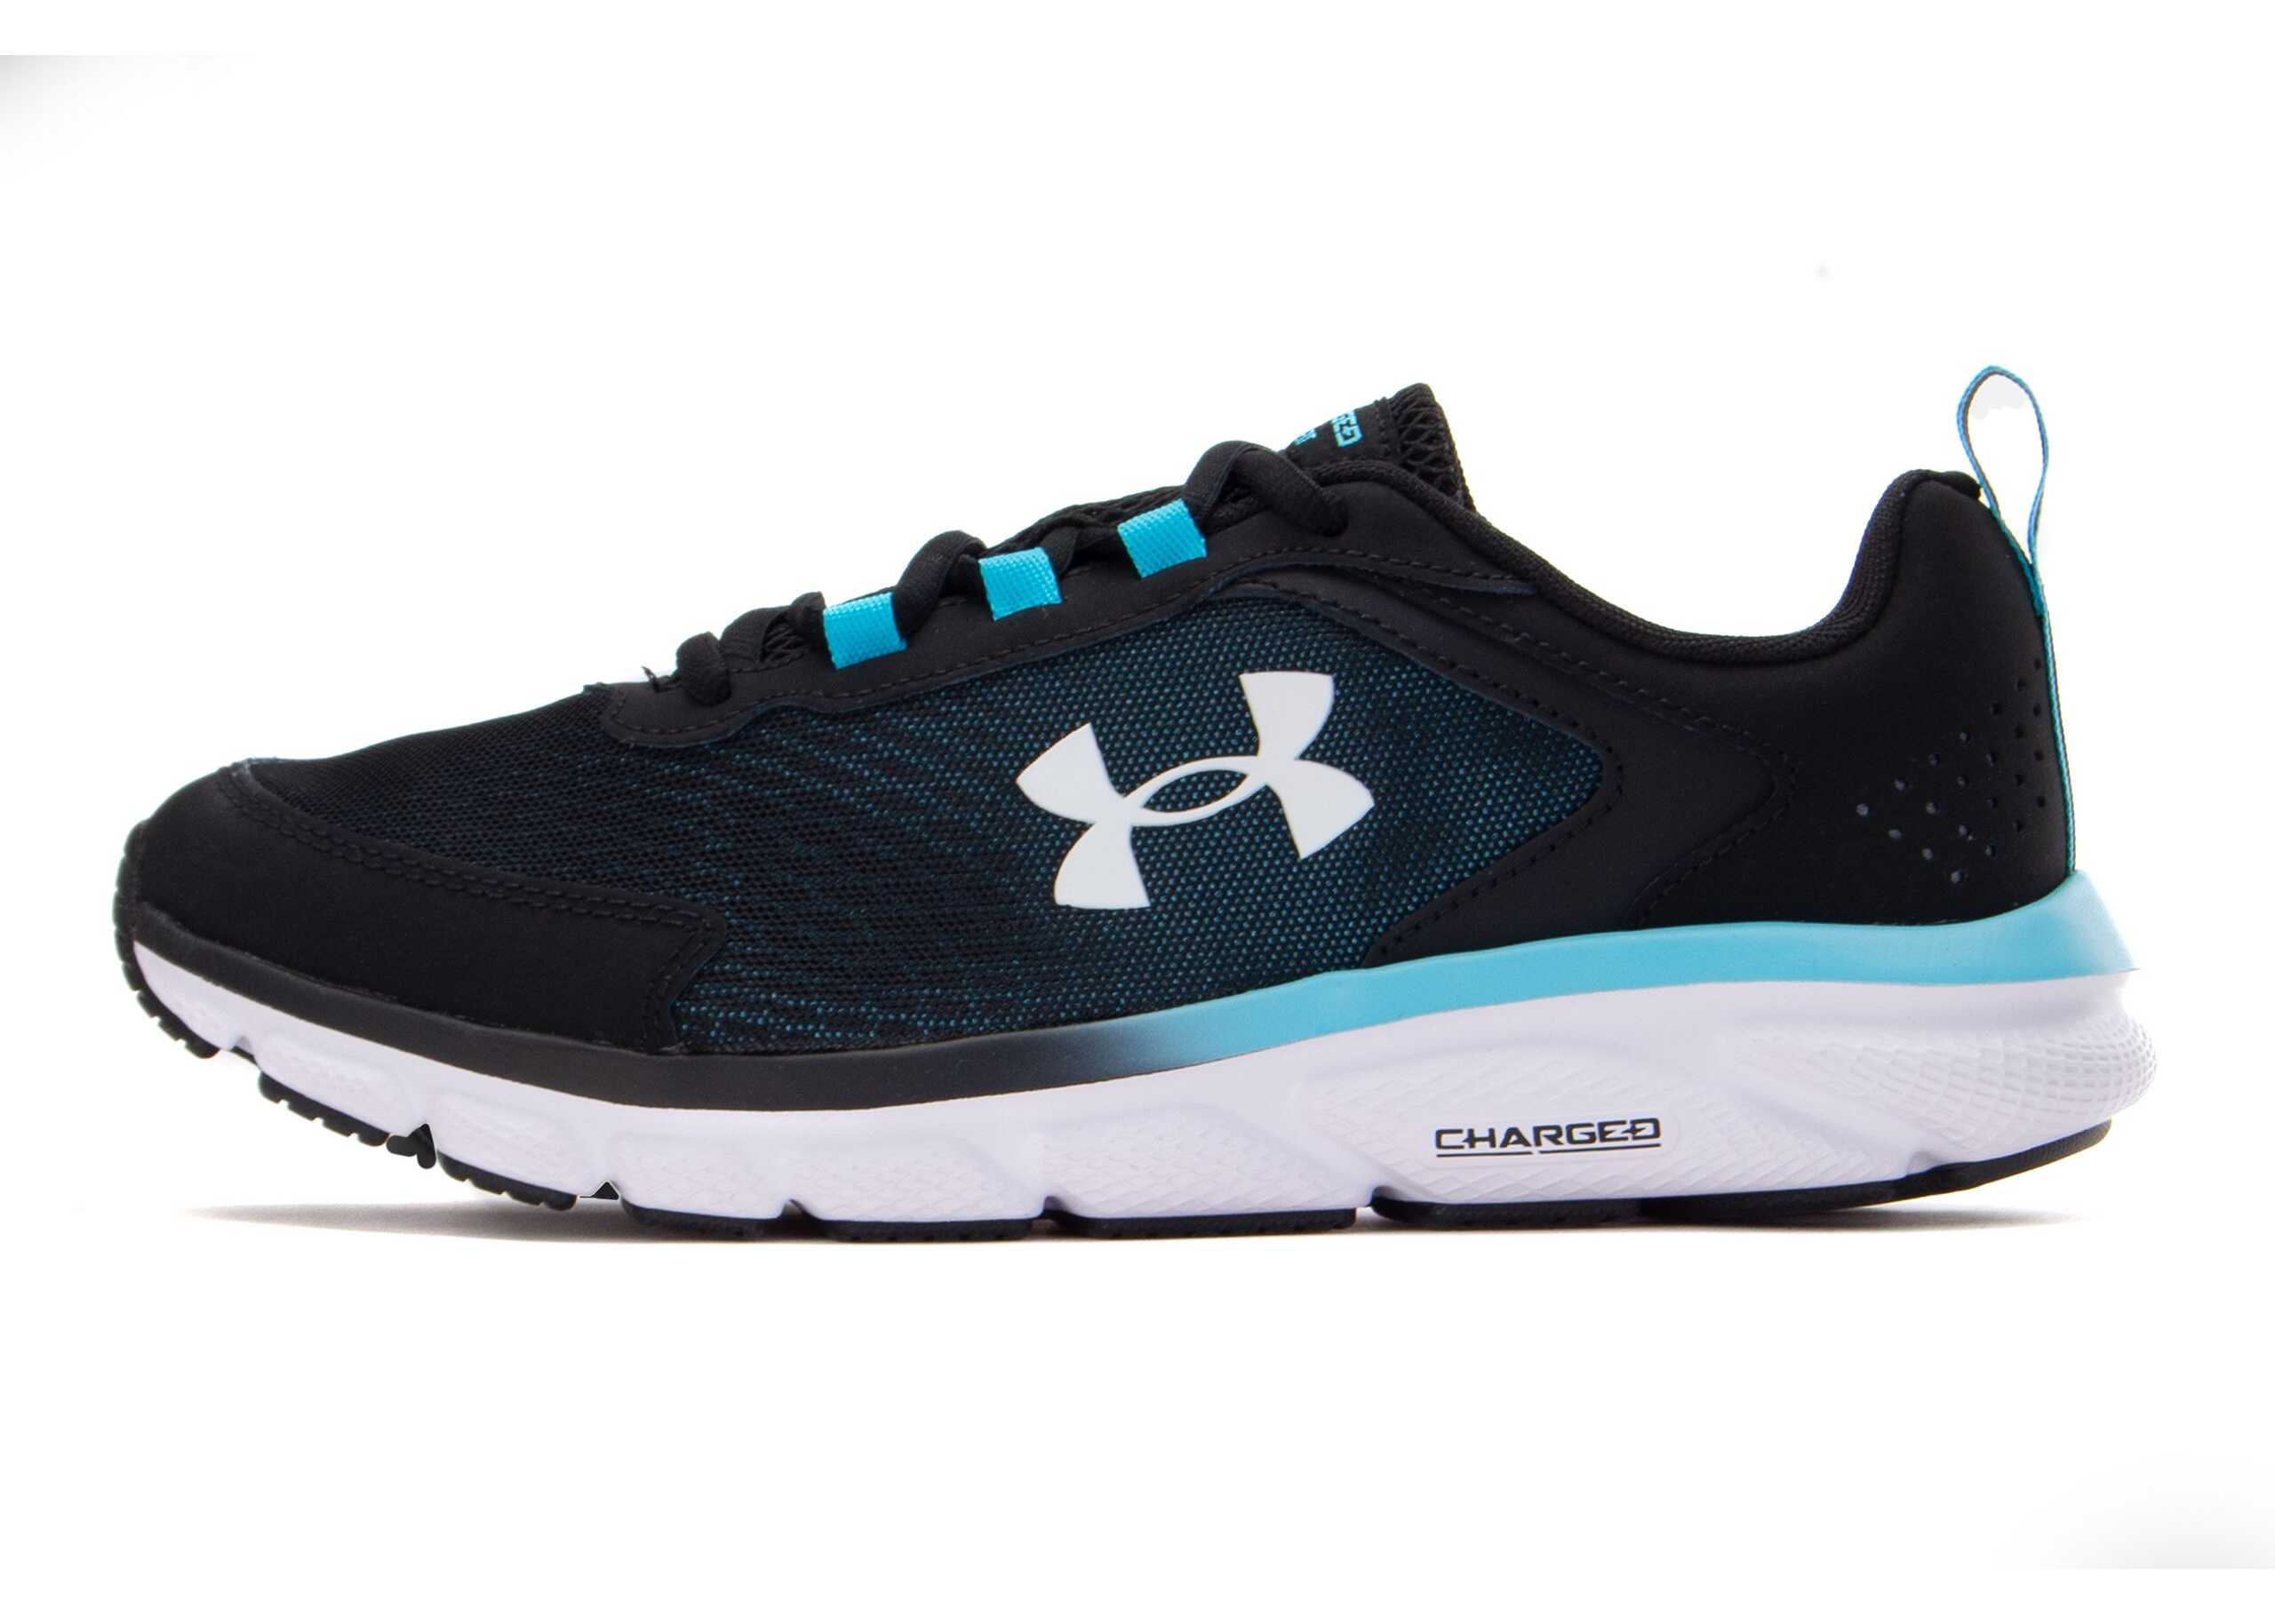 Under Armour Charged Assert 9 Black